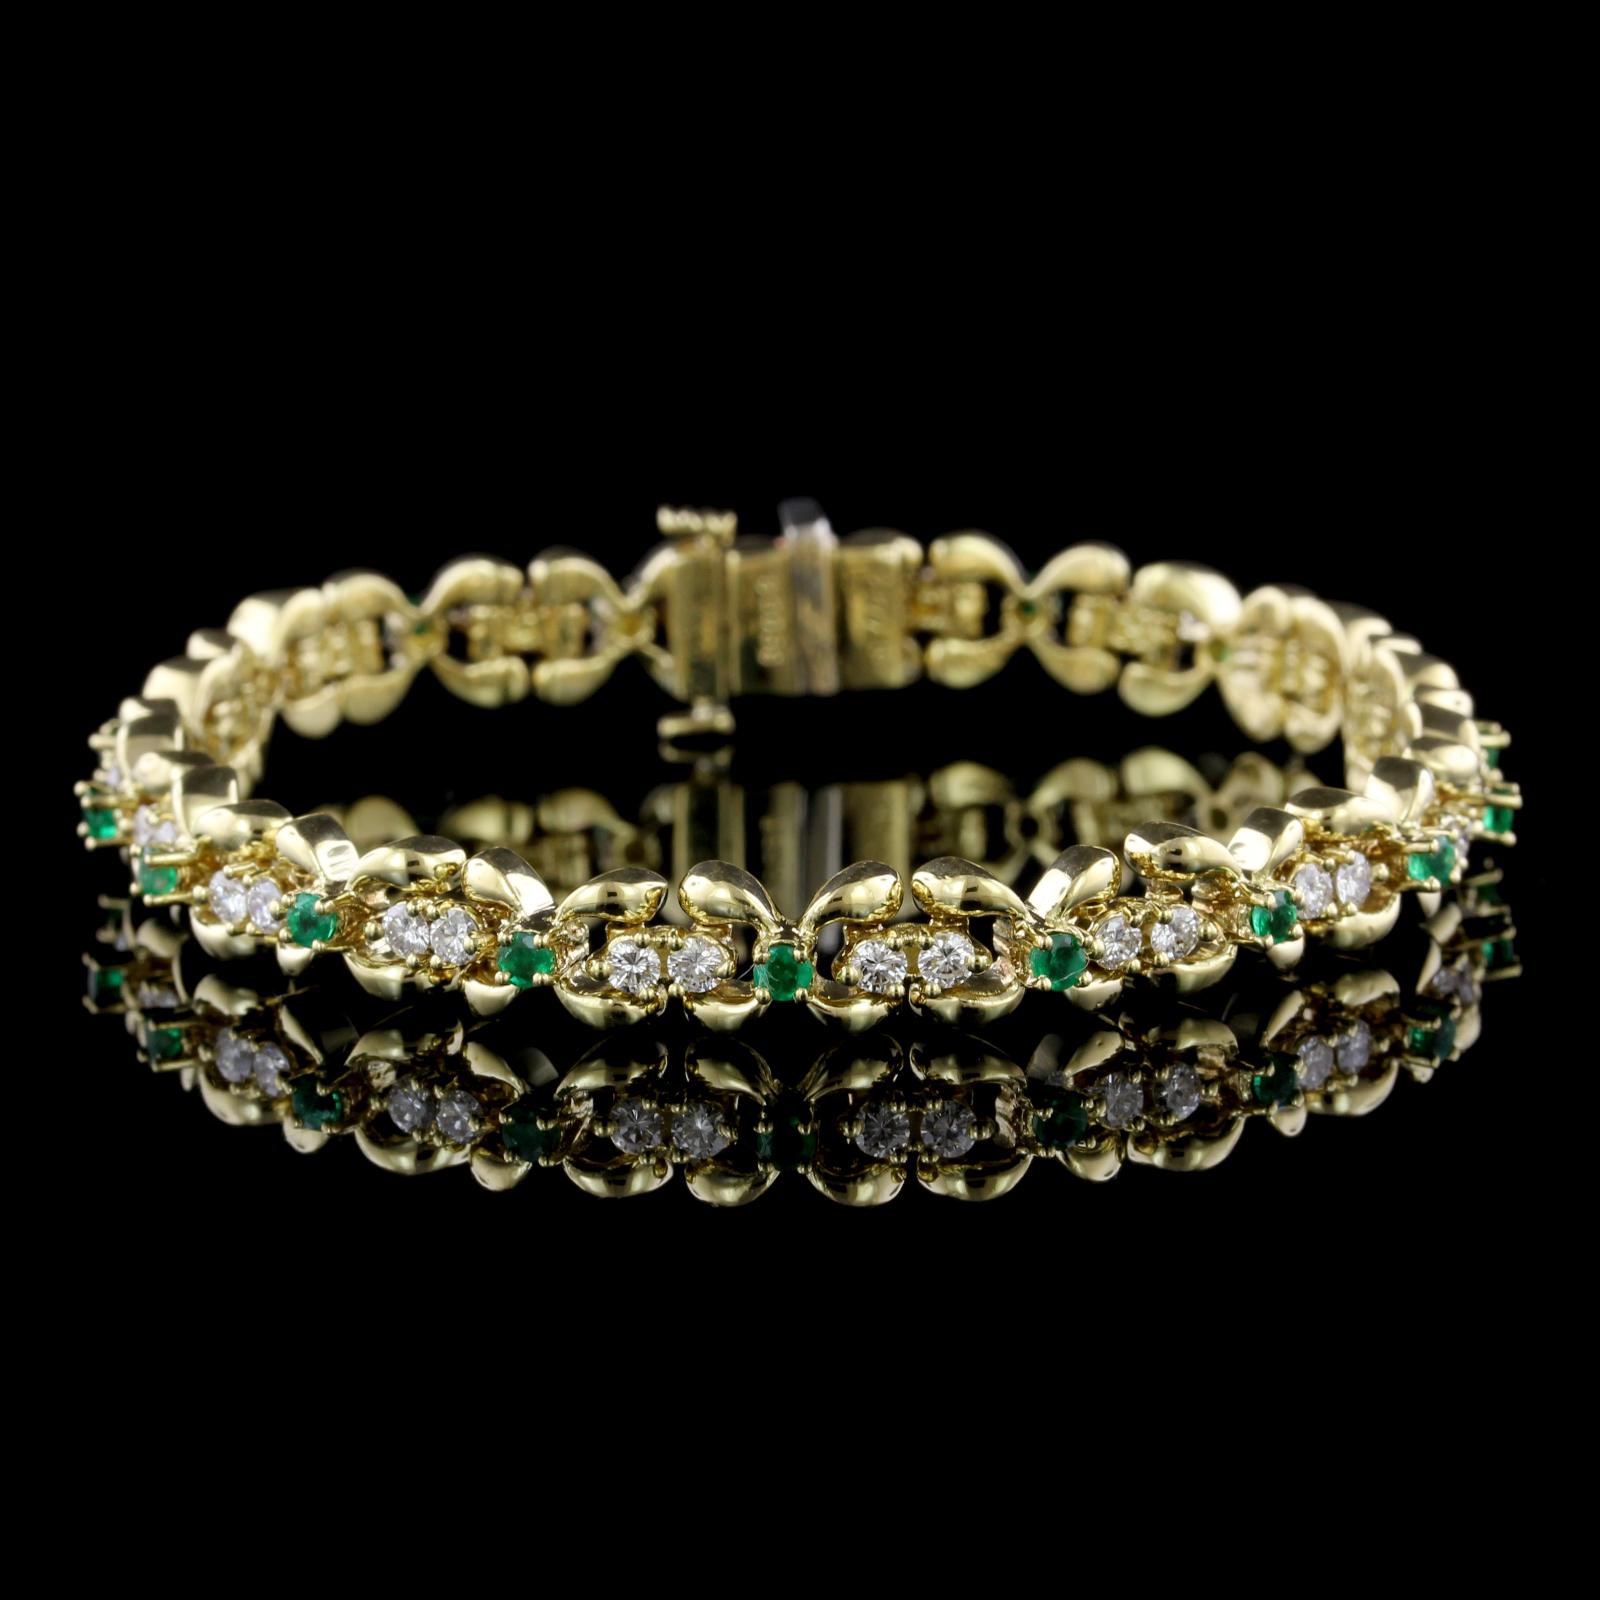 Kurt Wayne 18K Yellow Gold Emerald and Diamond Bracelet. The bracelet is set with 18 round cut emeralds, approx. total wt. .90cts., and 36 full cut diamonds, approx. total wt. 1.44cts., FG color, VS clarity, #80059, length 6 1/2